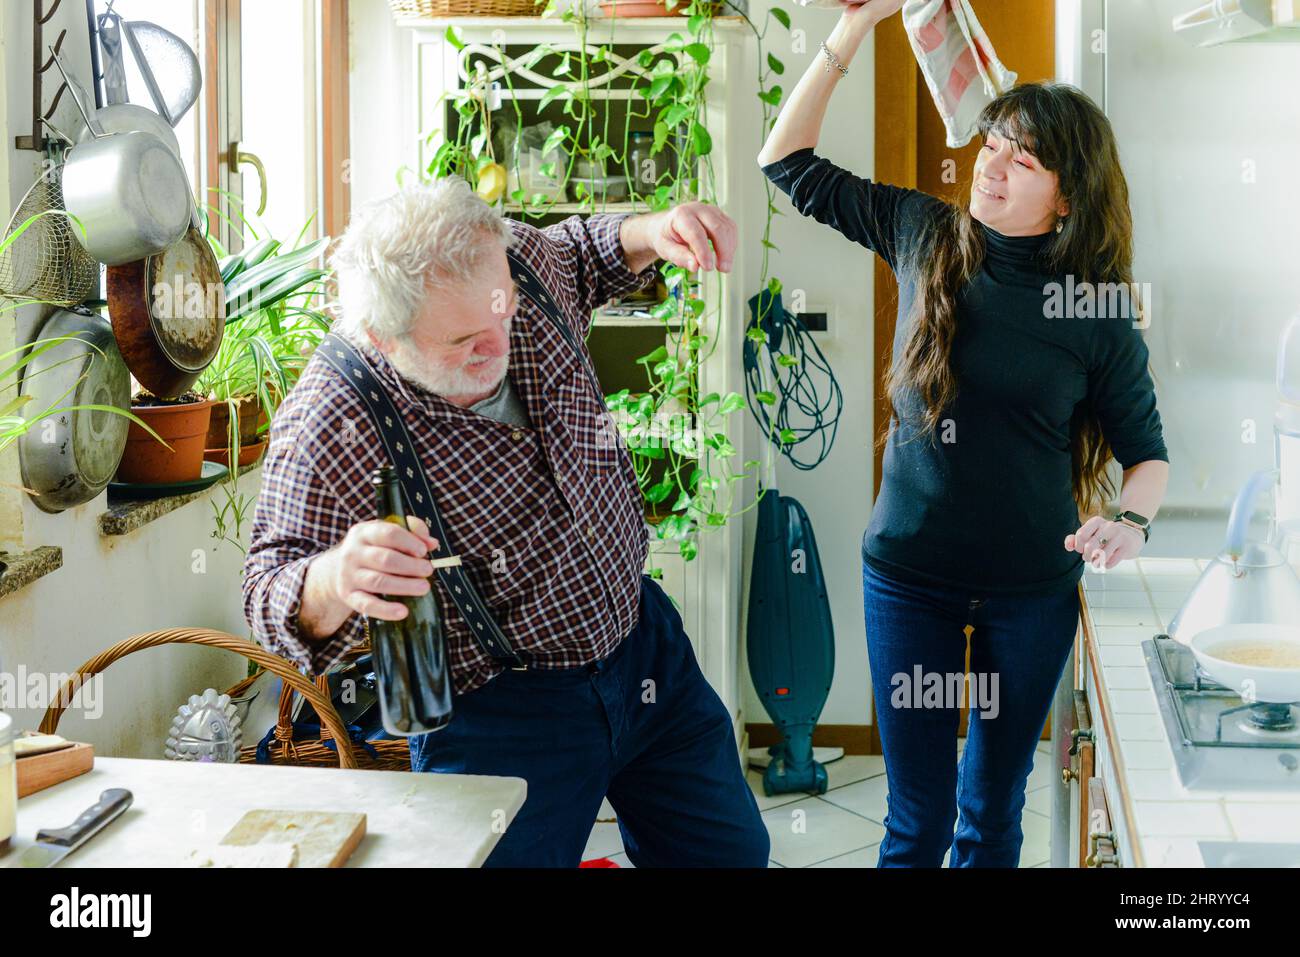 caucasian senior man drinking wine and getting drunk at home stressing younger hispanic wife - alcoholism and domestic violence concept Stock Photo